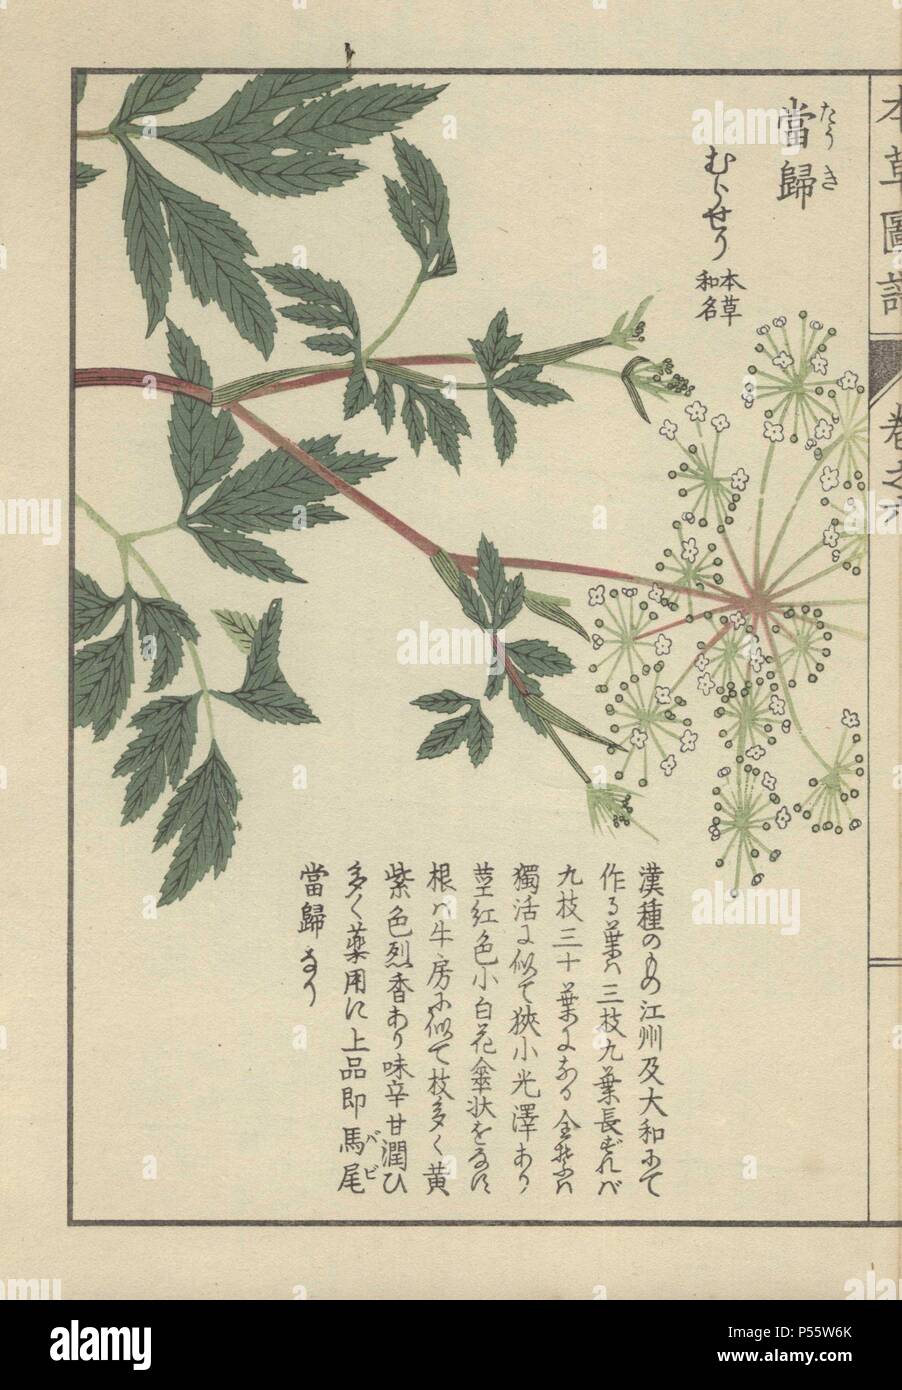 Leaves and delicate white florets of the licorice-root plant (lovage). Ligusticum acutilobum. Touki.. Colour-printed woodblock engraving by Kan'en Iwasaki from 'Honzo Zufu,' an Illustrated Guide to Medicinal Plants, 1884. Iwasaki (1786-1842) was a Japanese botanist, entomologist and zoologist. He was one of the first Japanese botanists to incorporate western knowledge into his studies. Stock Photo